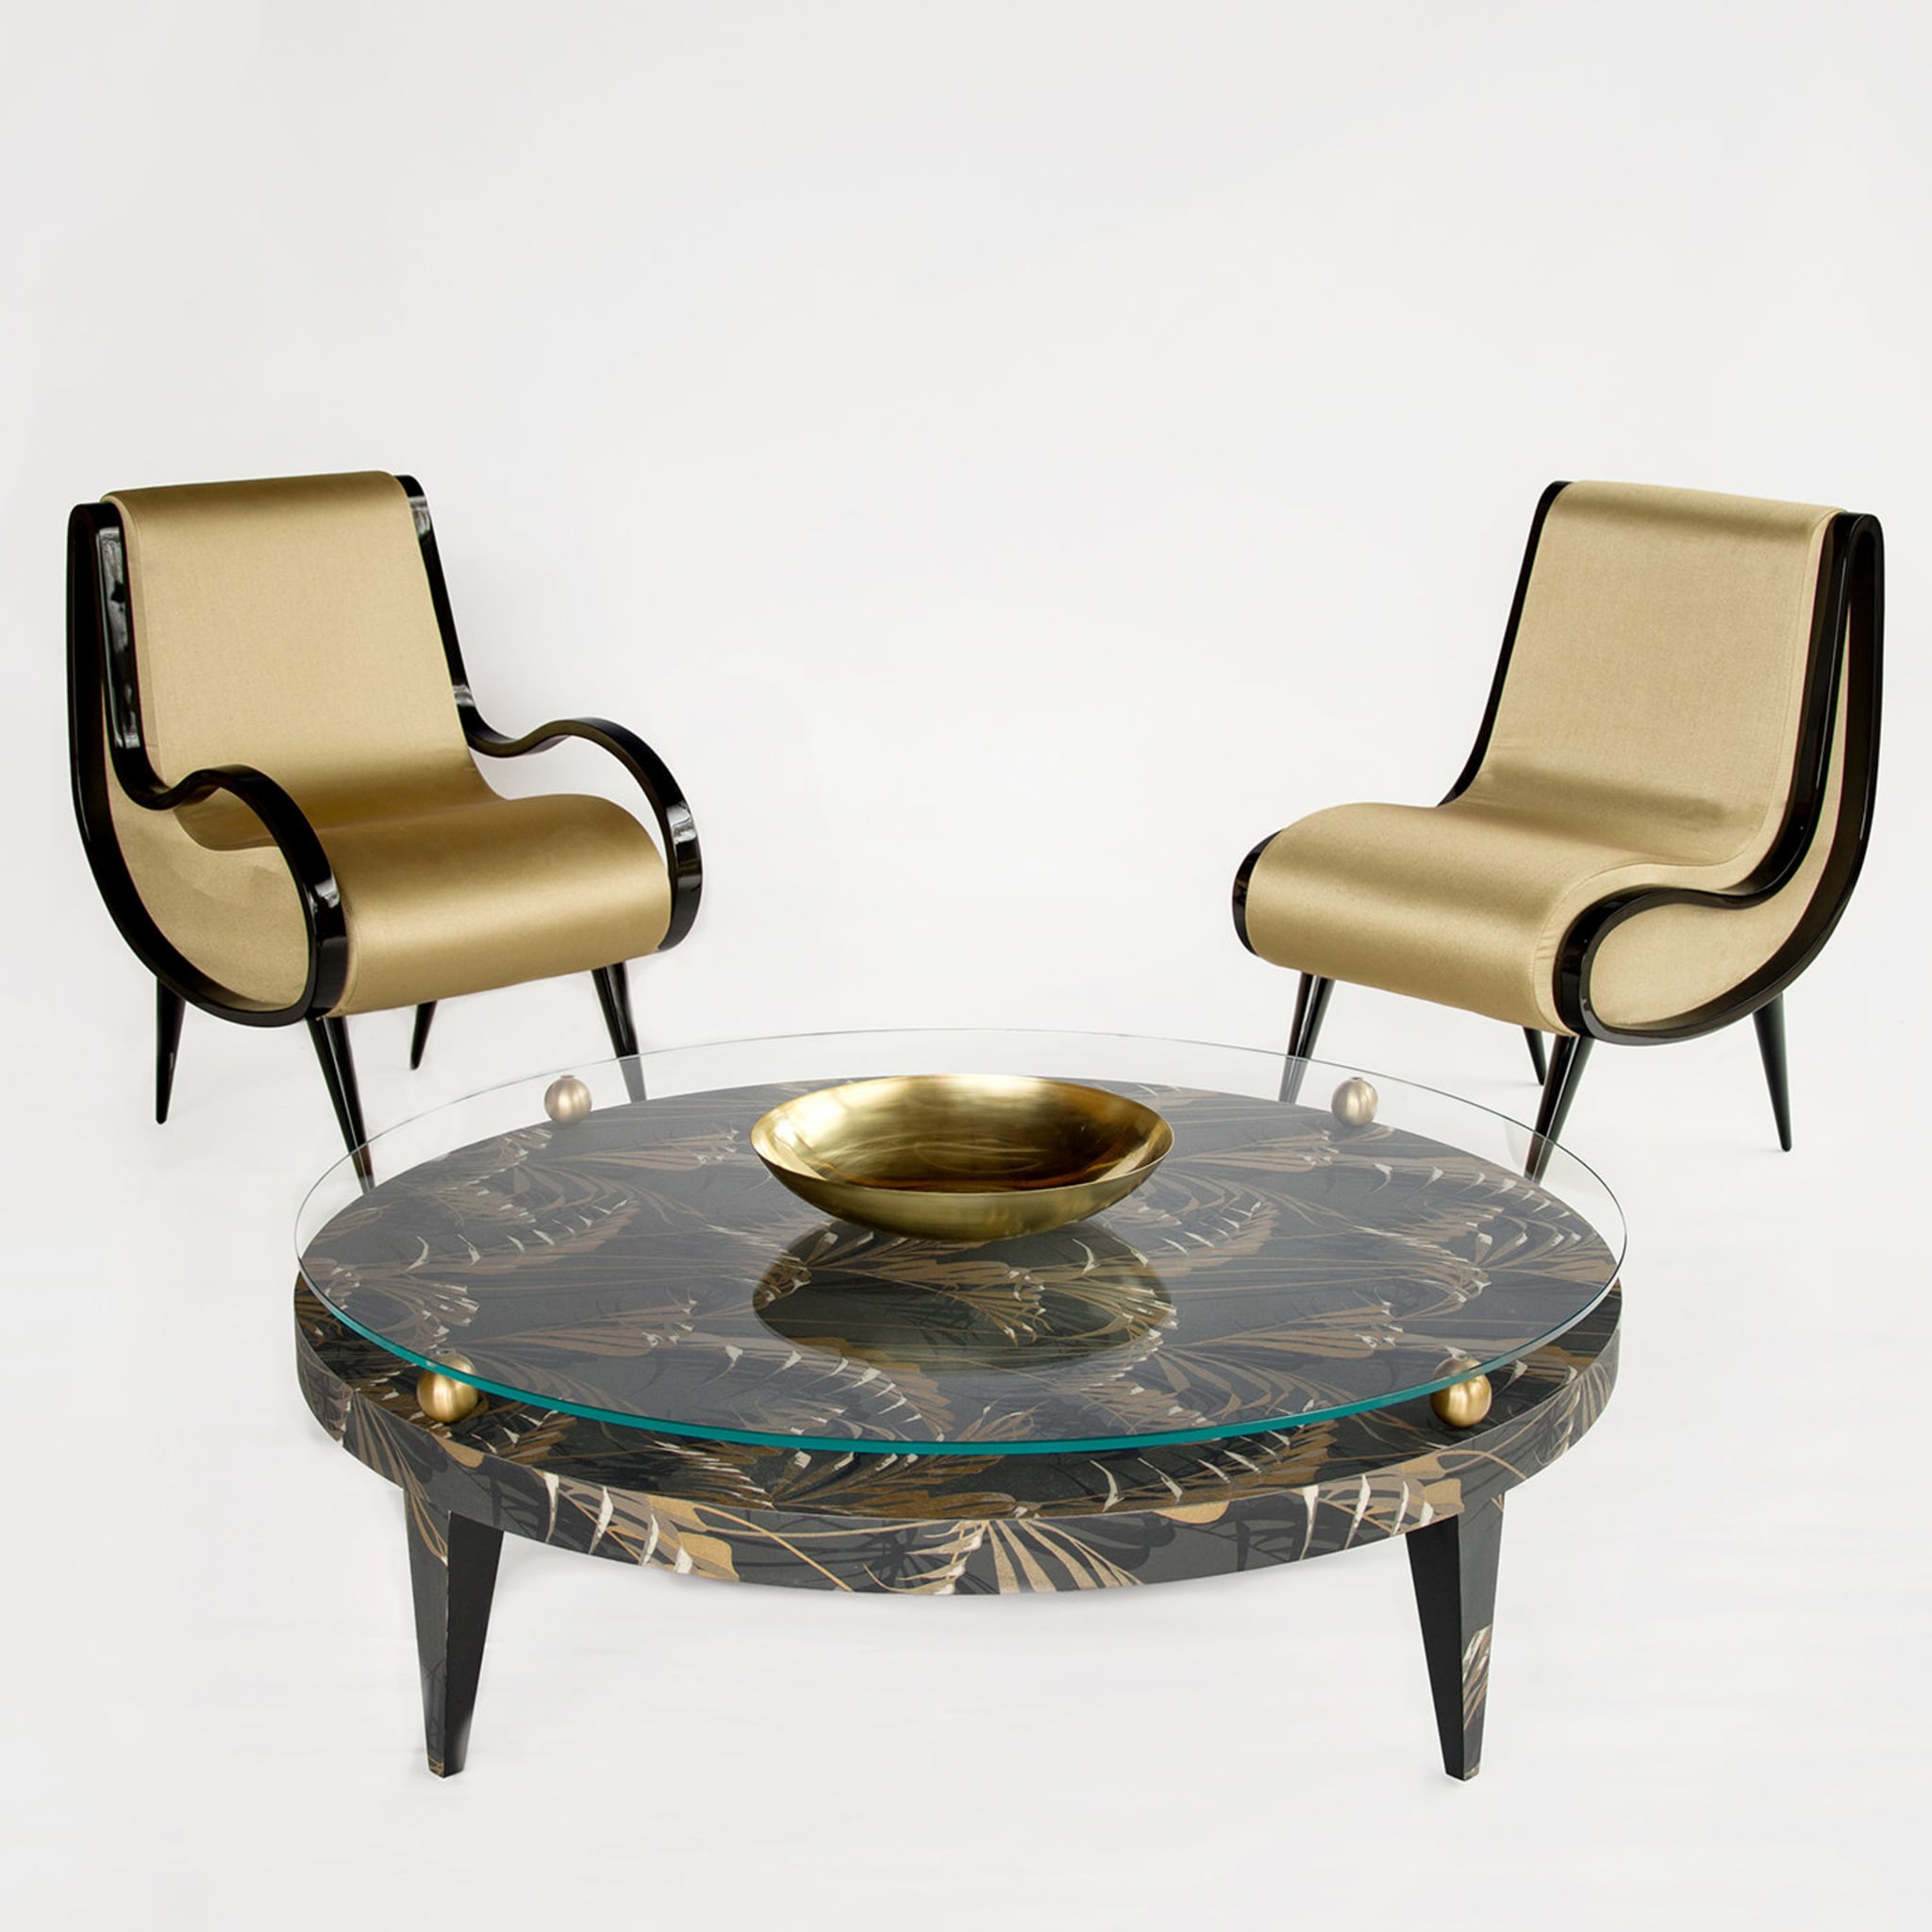 Eclipse armchair in gold fabric - Alternative view 1